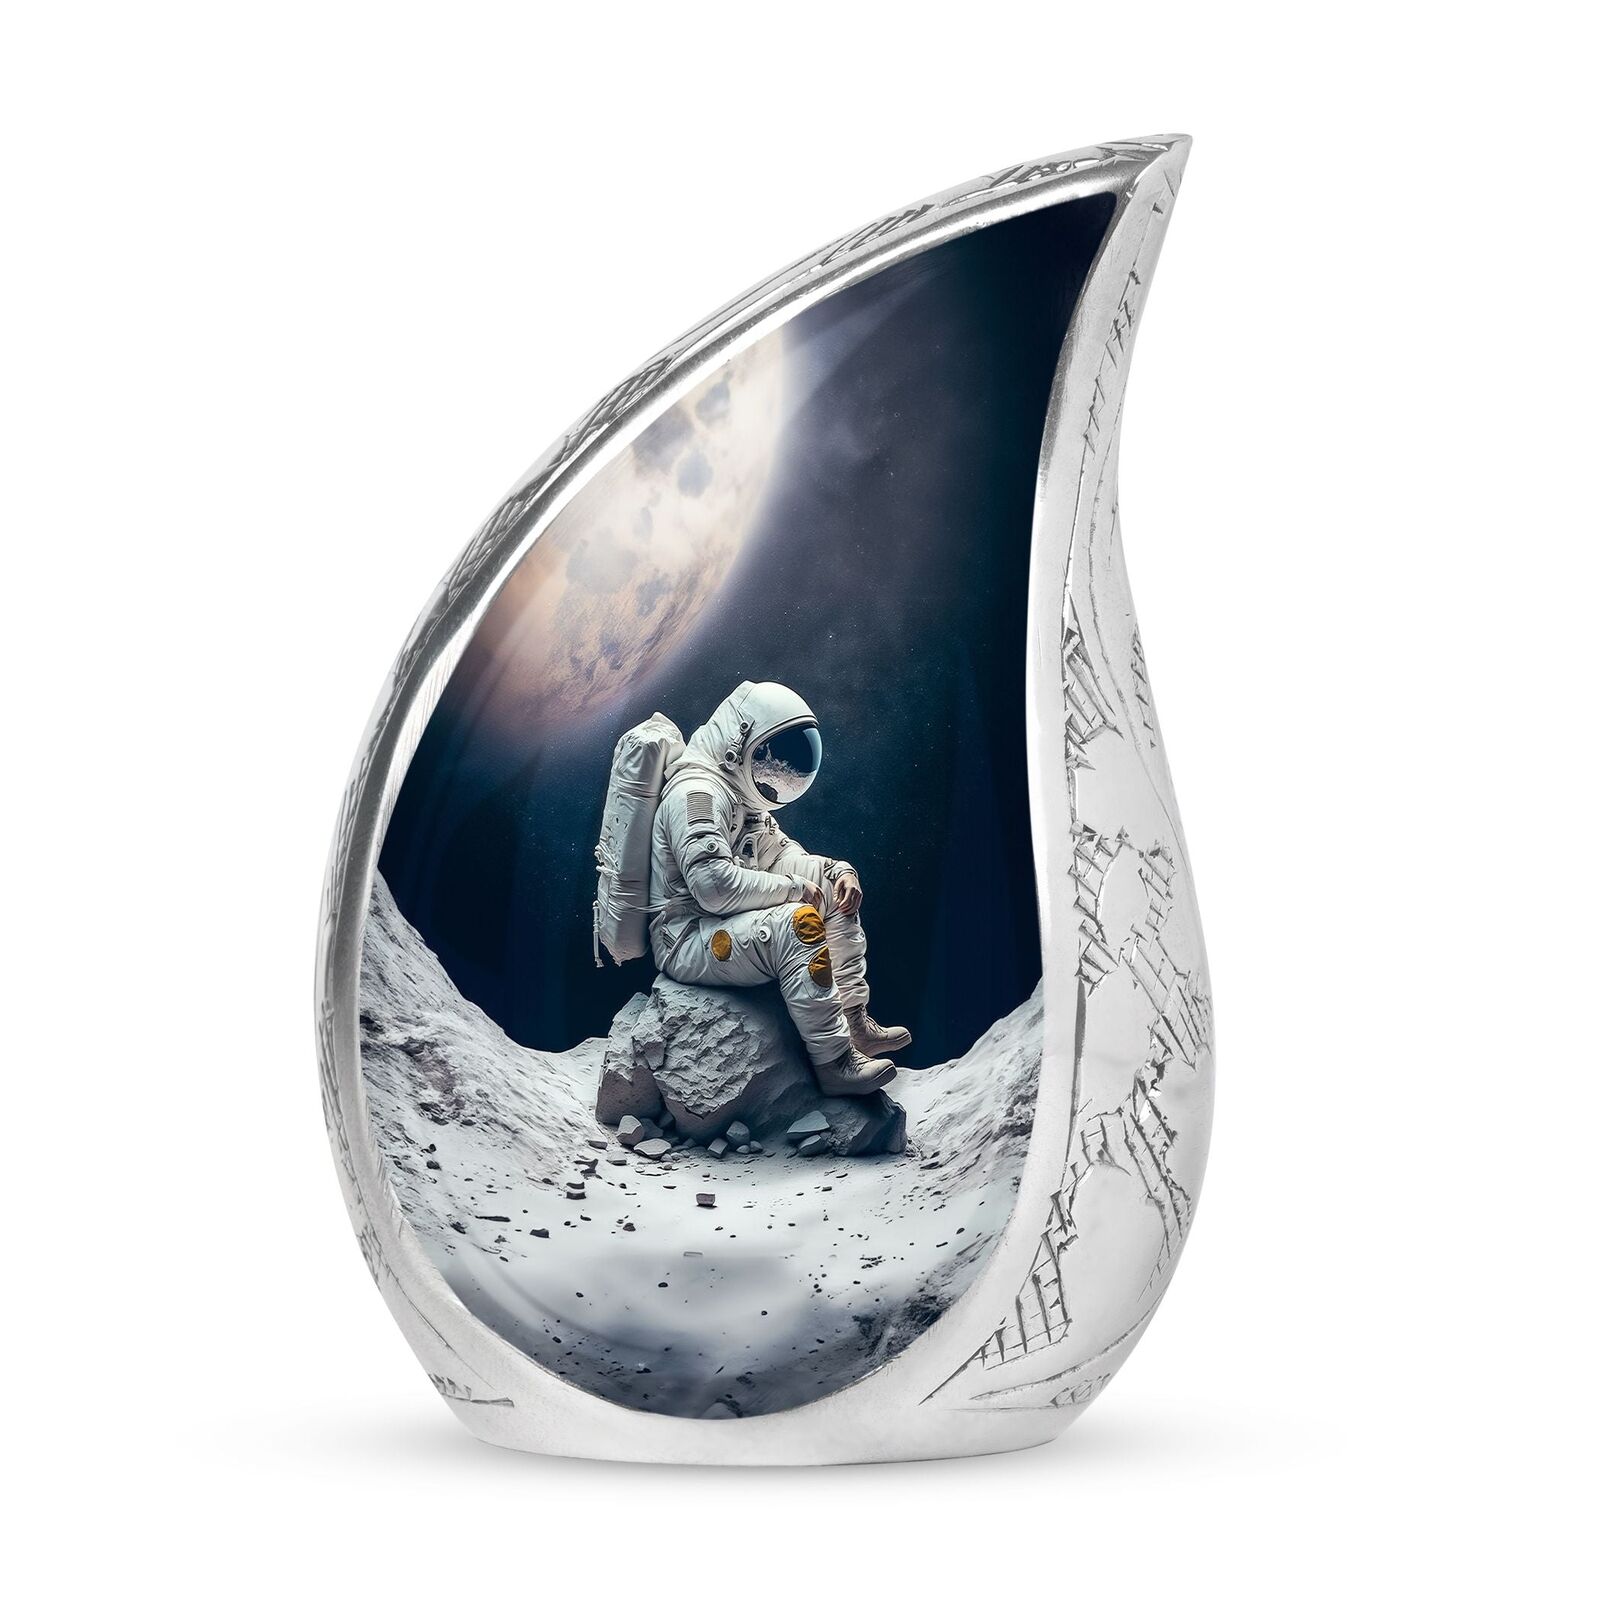 Discover the 'Astronaut Suit Sitting on Cracked Stone' - Unique Urns For Adults